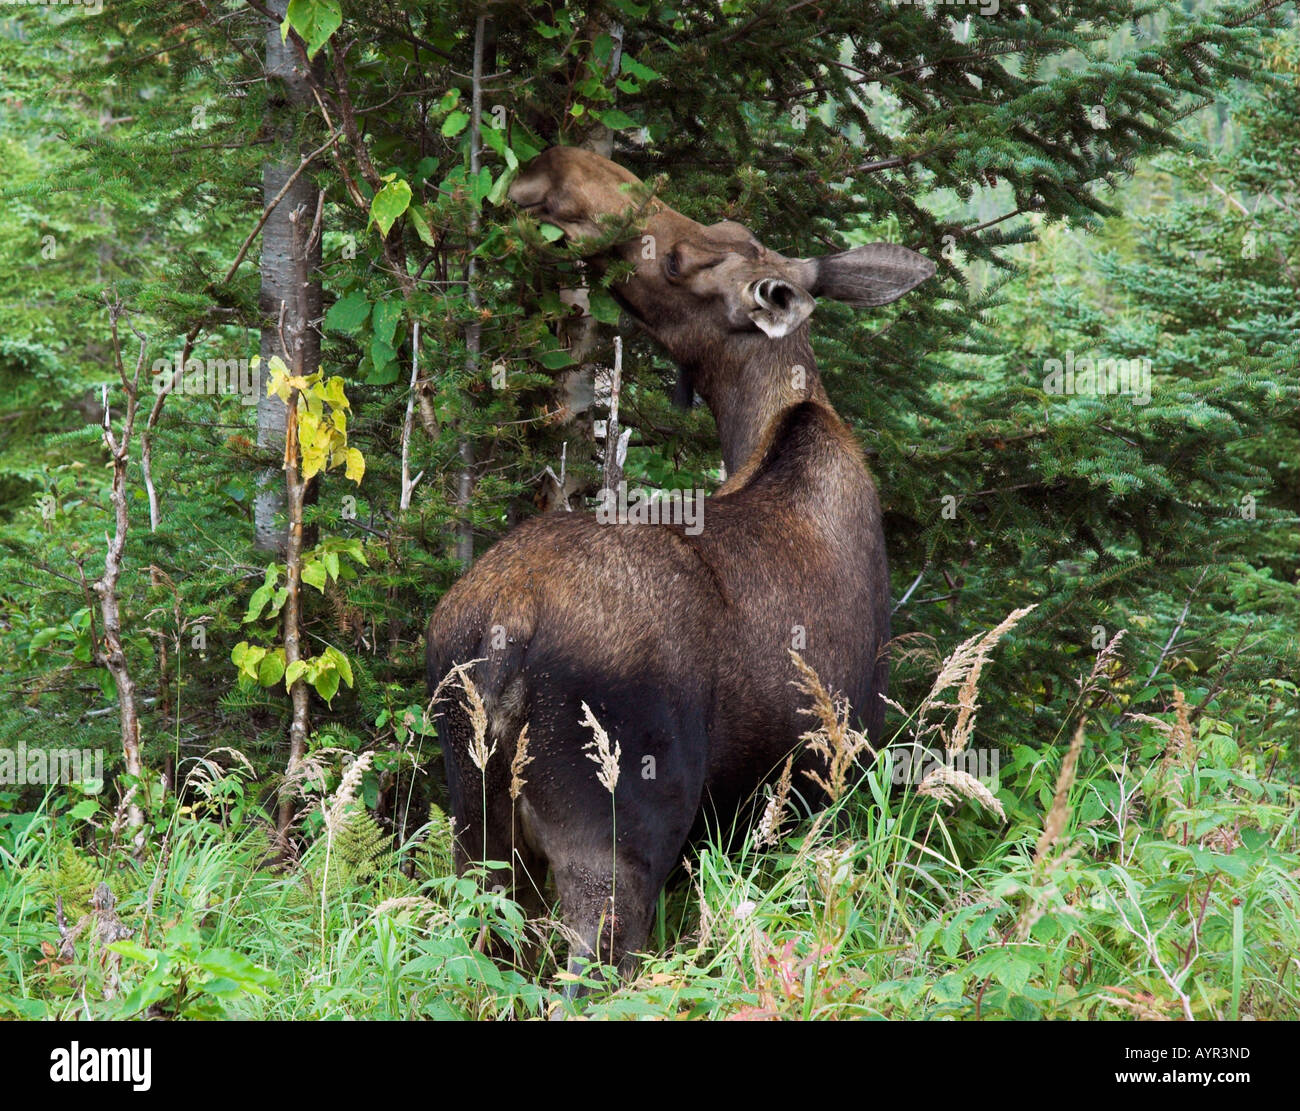 A moose eating leaves in Gaspesie National Park, Quebec Stock Photo